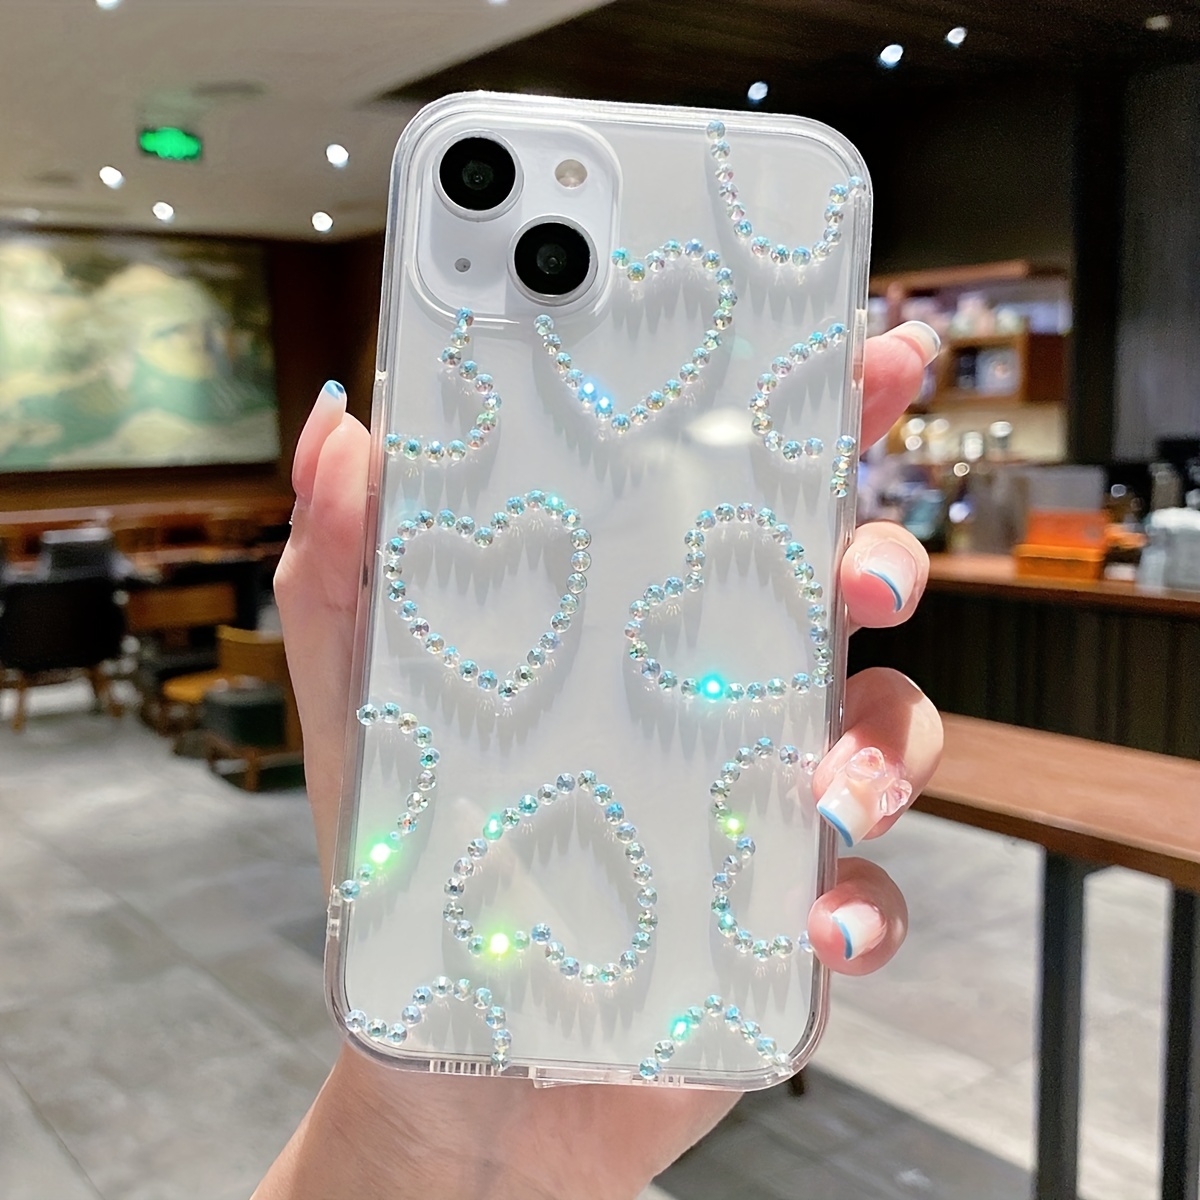 

Transparent Case With Heart, 5 Stars And Double Flower Rhinestone Protection Cover For Iphone